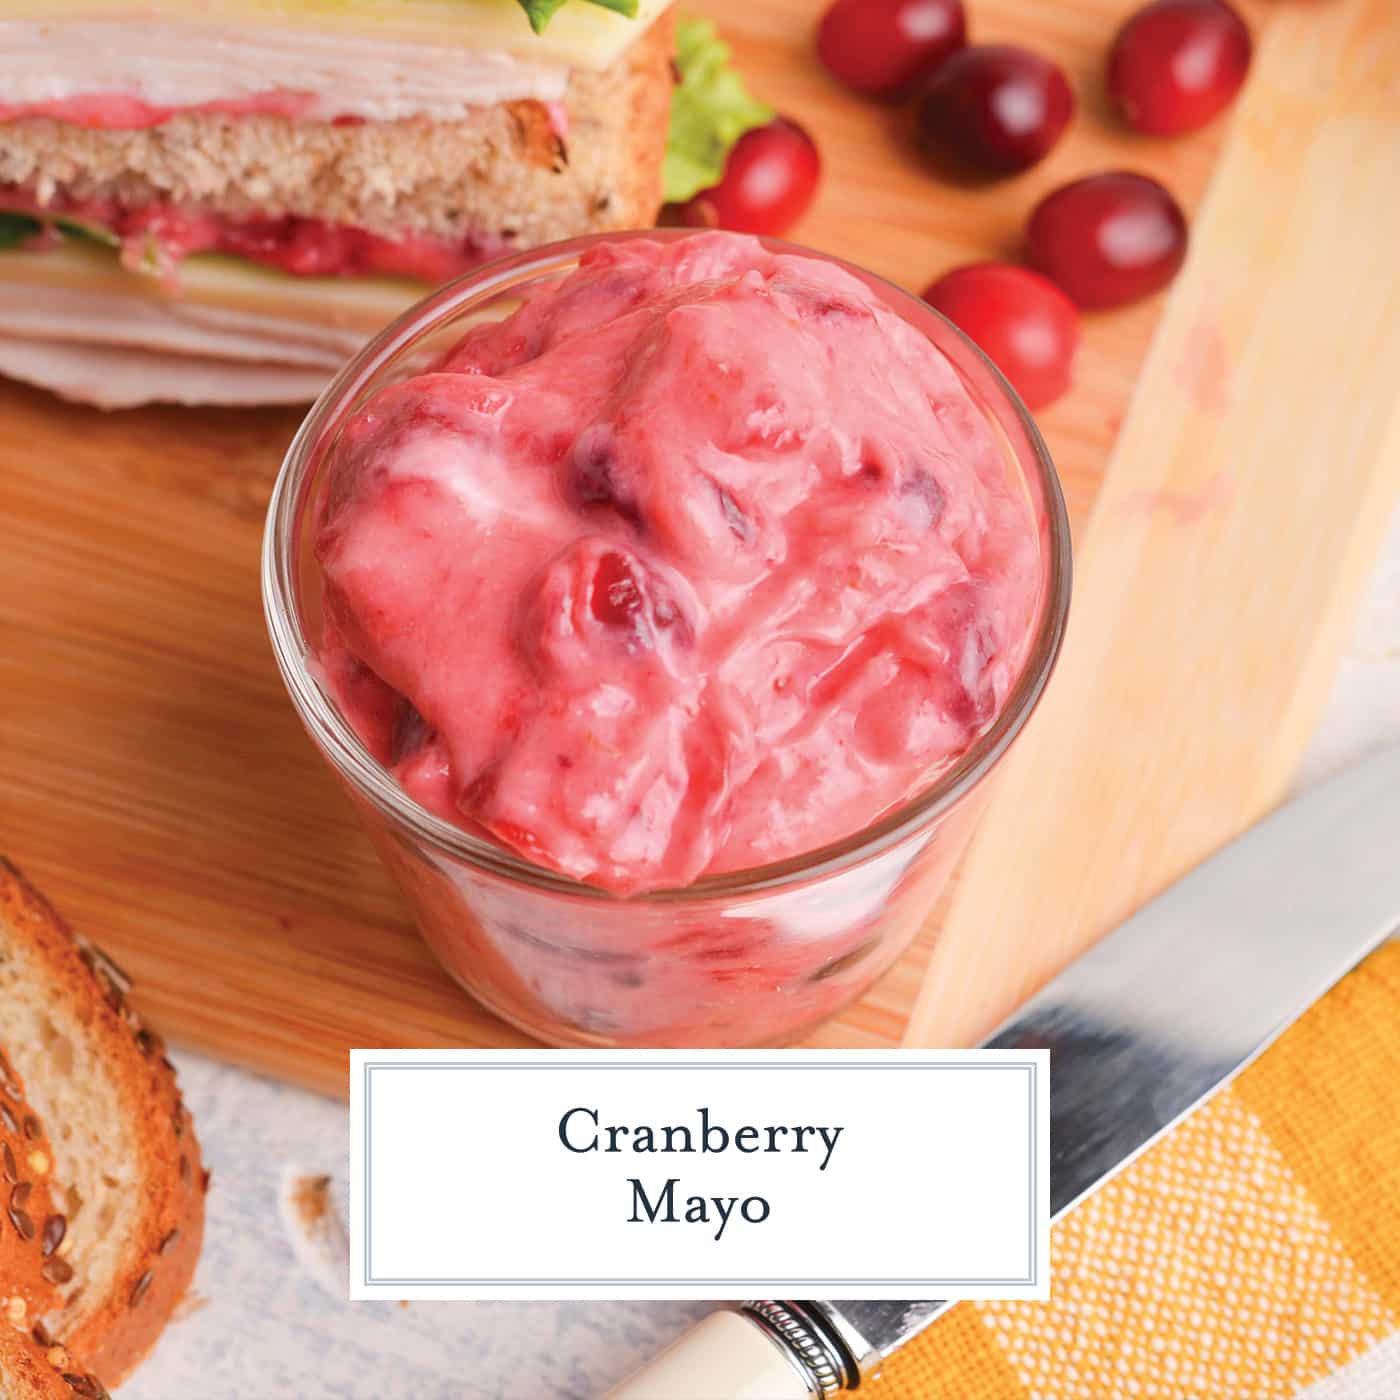 cranberry mayo recipe with text overlay